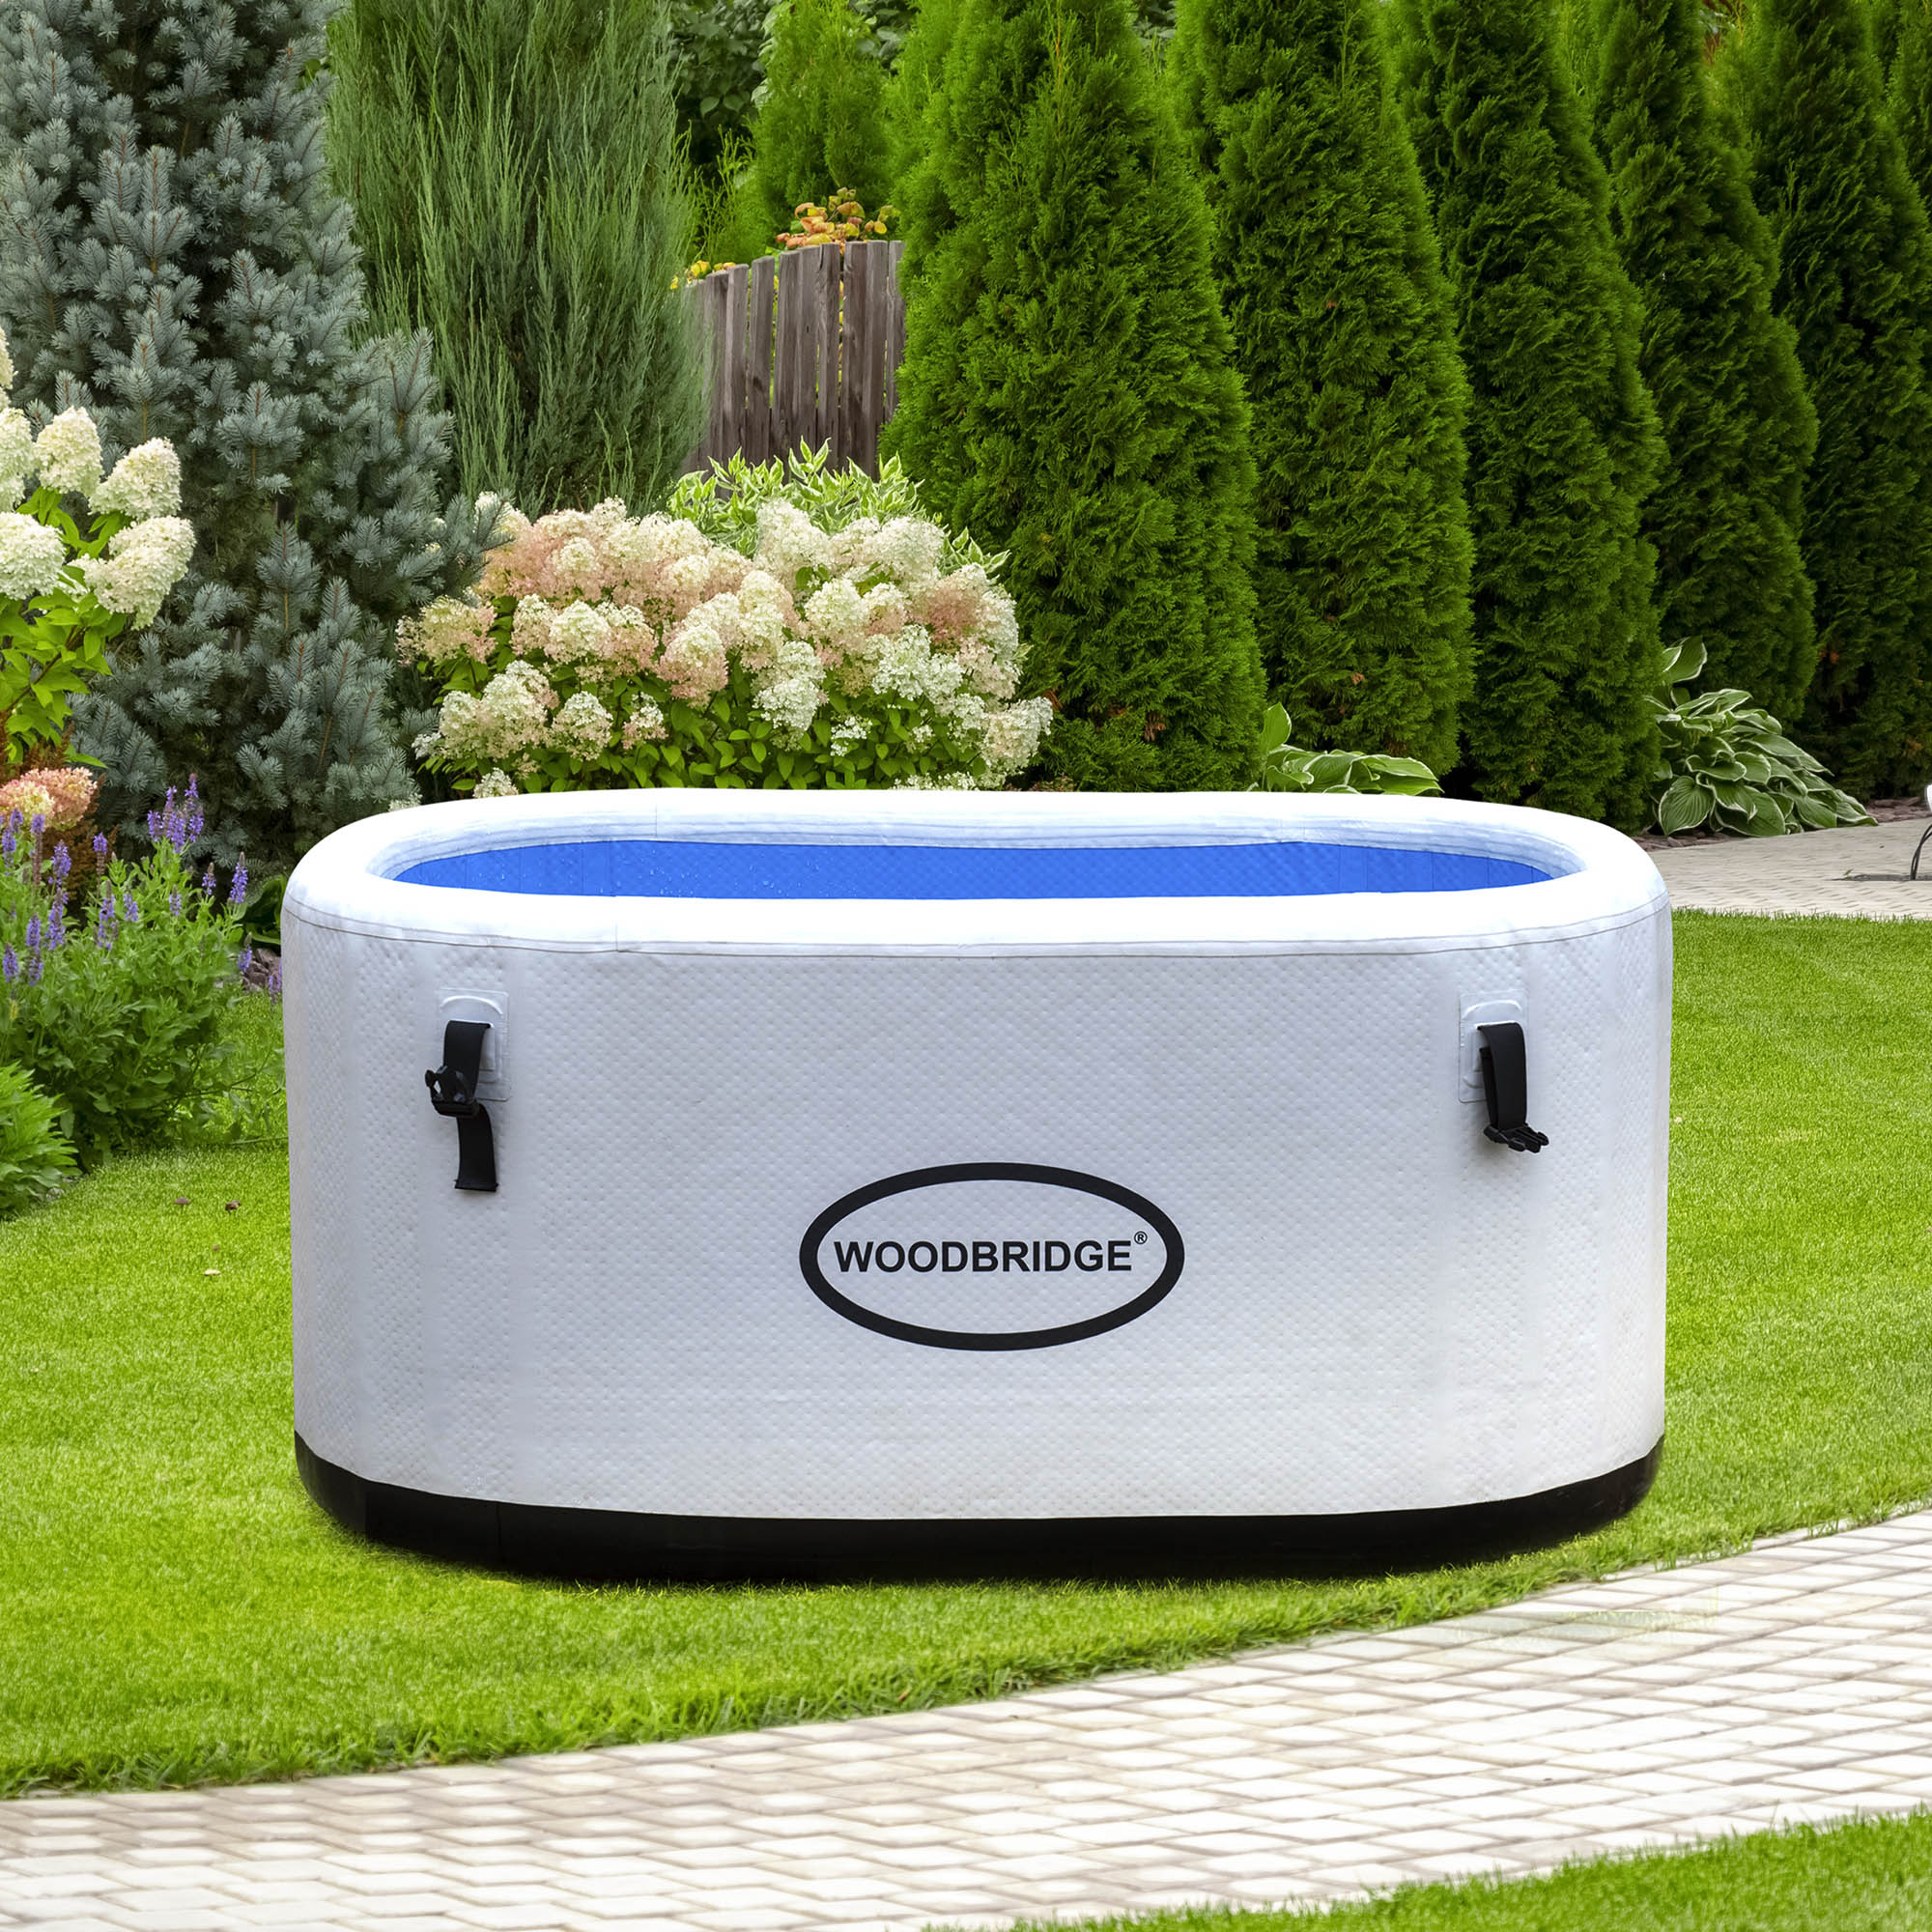 WOODBRIDGE Inflatable Oval Ice Bath Cold Plunge Tub with PVC Insulated Lid, Hand Pump and Repair Kit Included, Anti-Slid Bottom, WIC01W-PIB